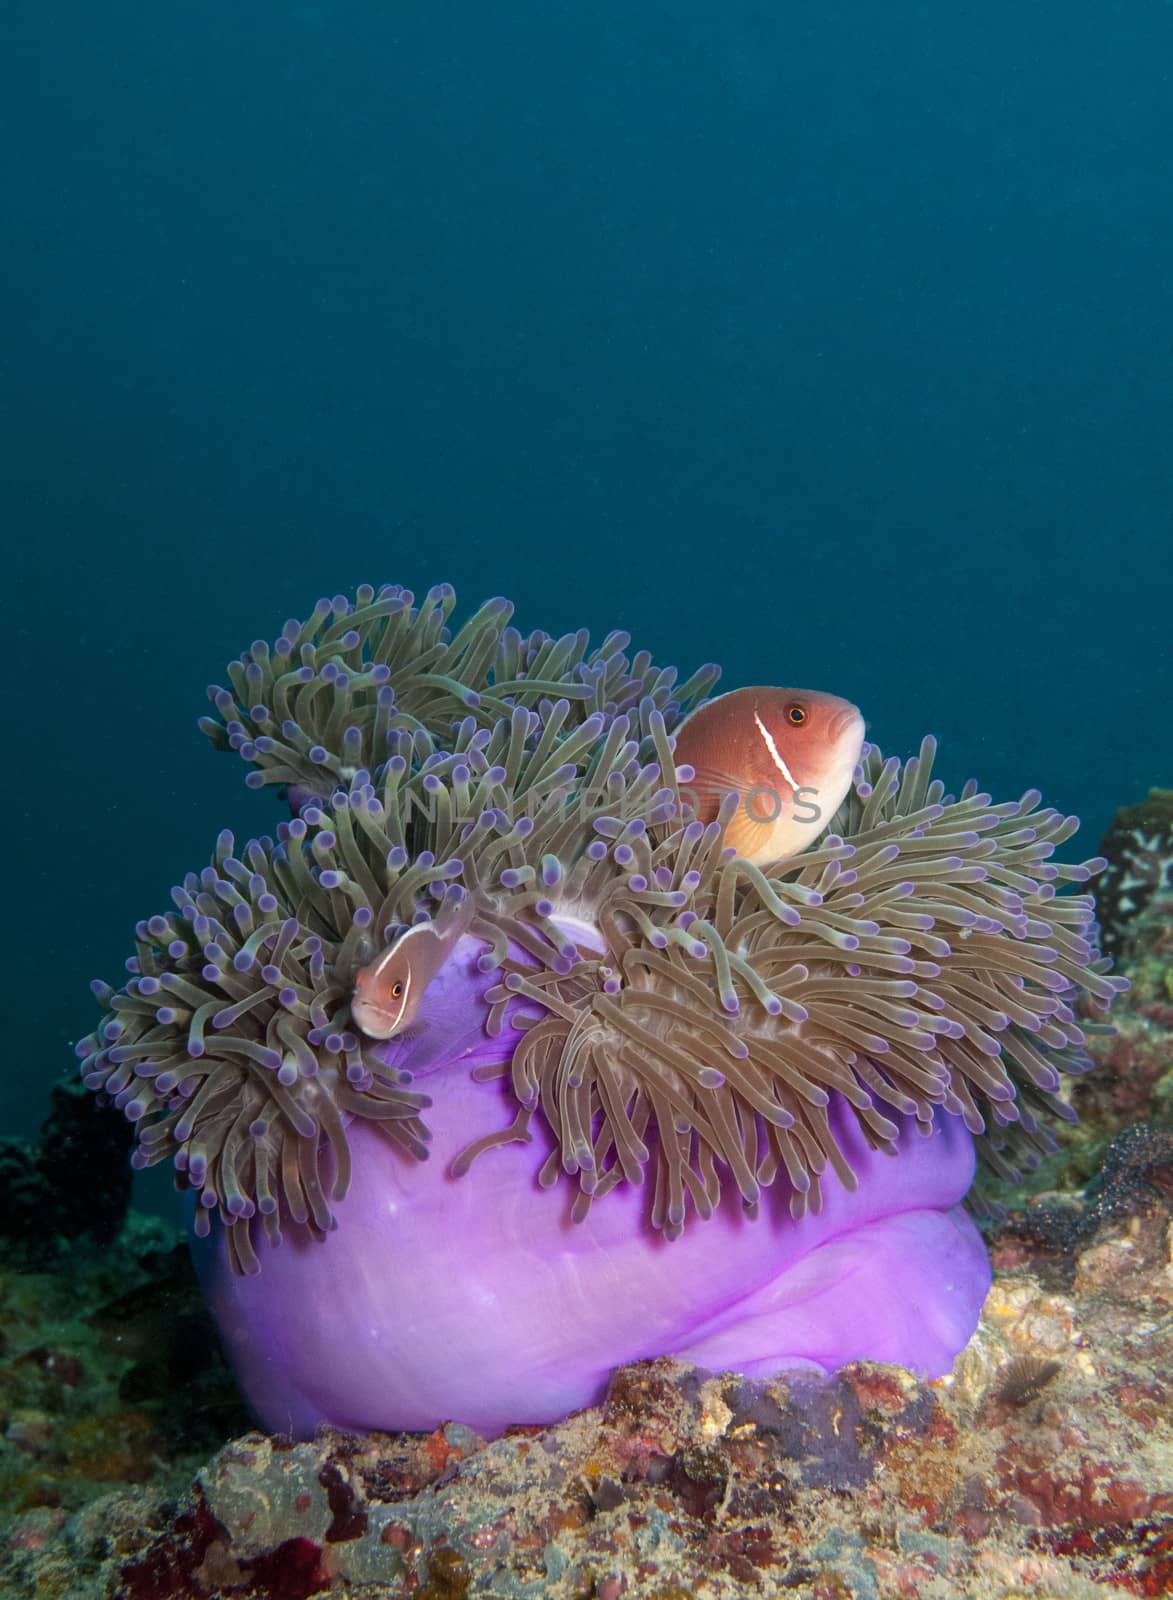 anemone with pink anemone fish by AdrianKaye